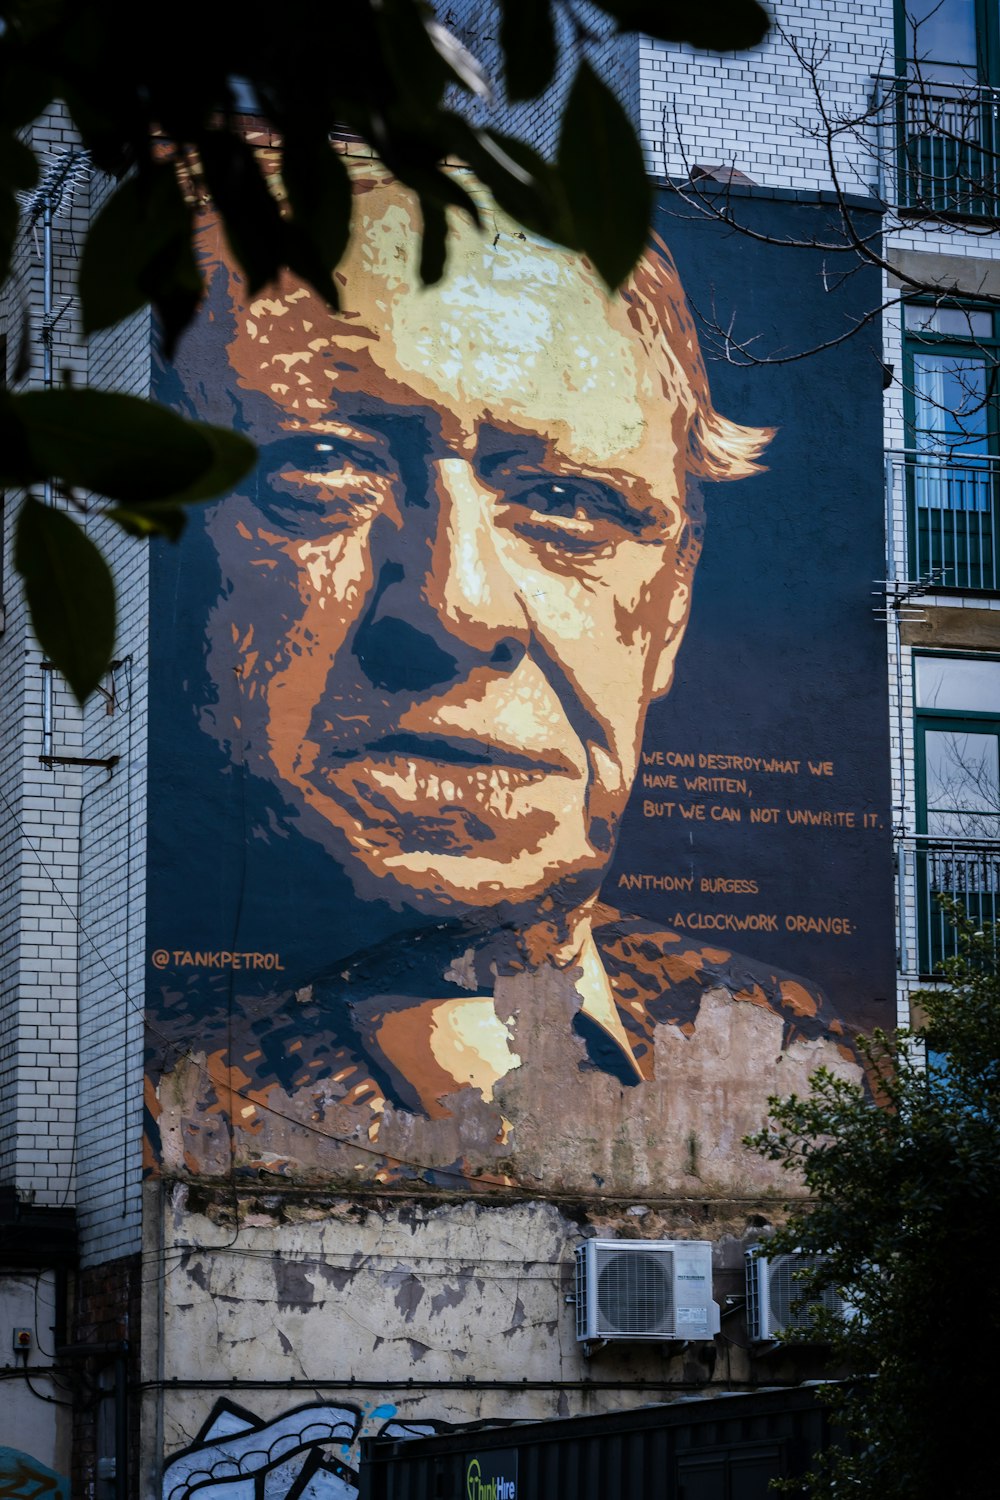 a painting of a man's face on the side of a building